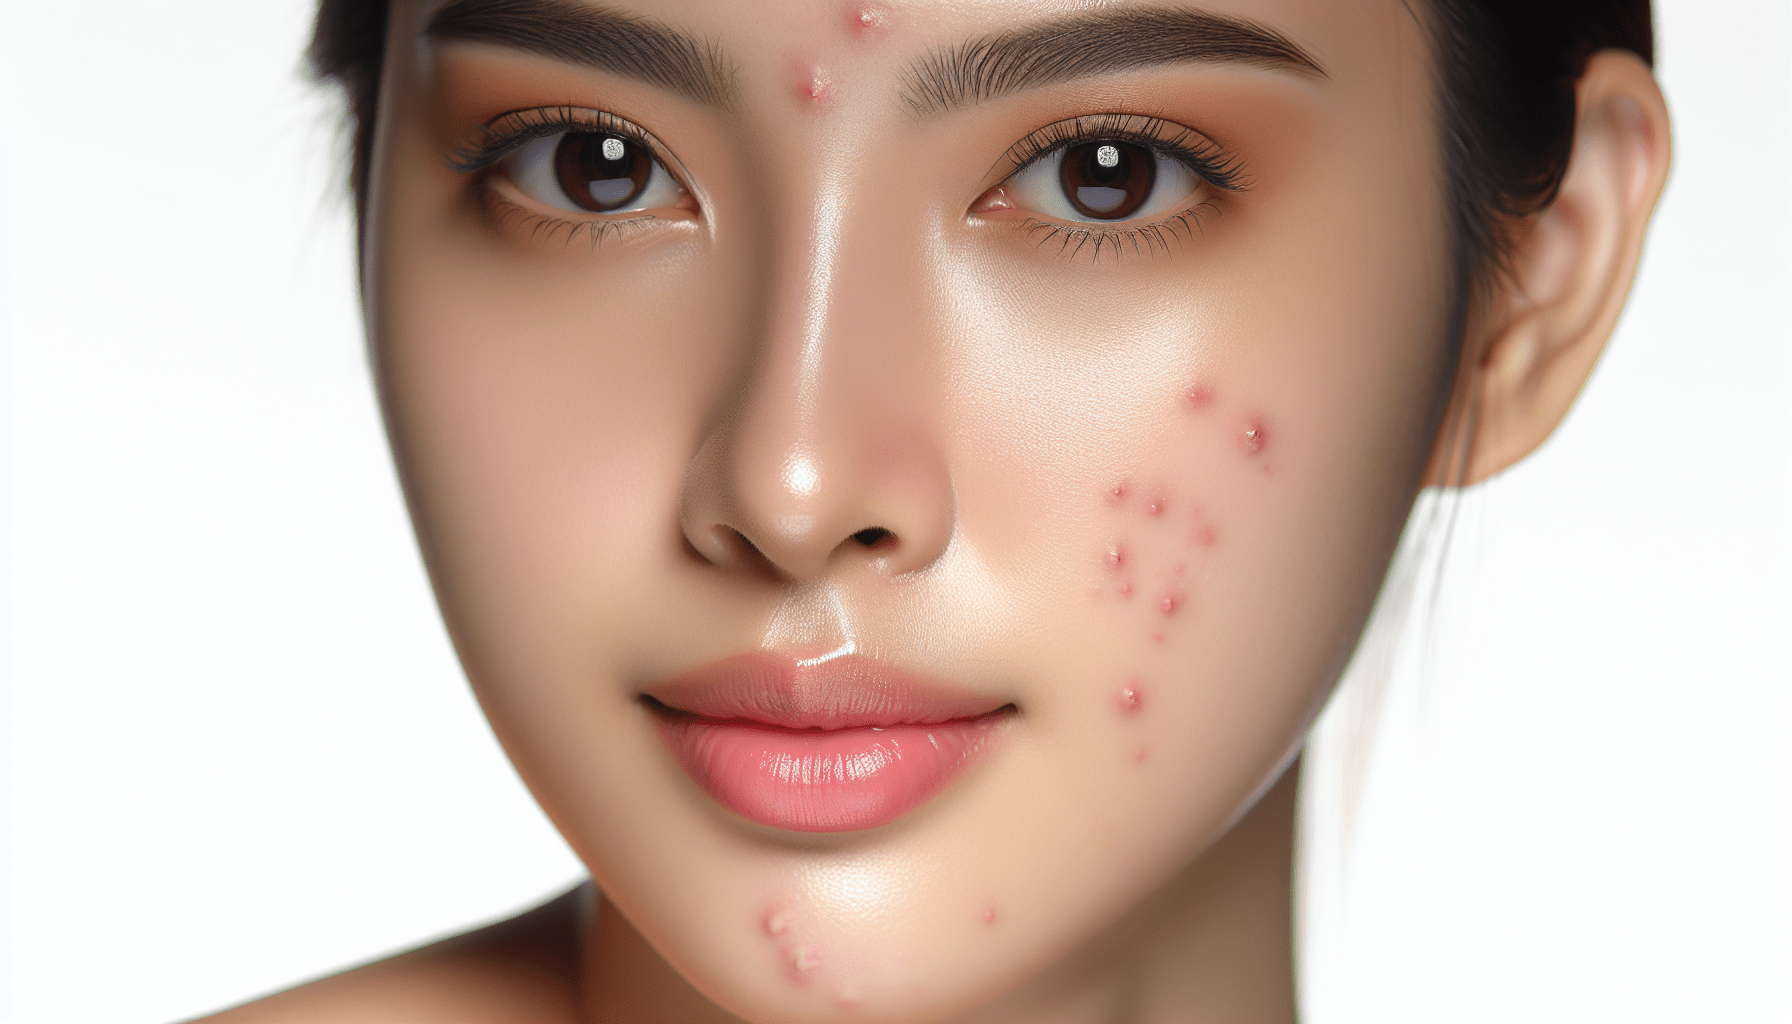 What Makes Acne Clear Up?